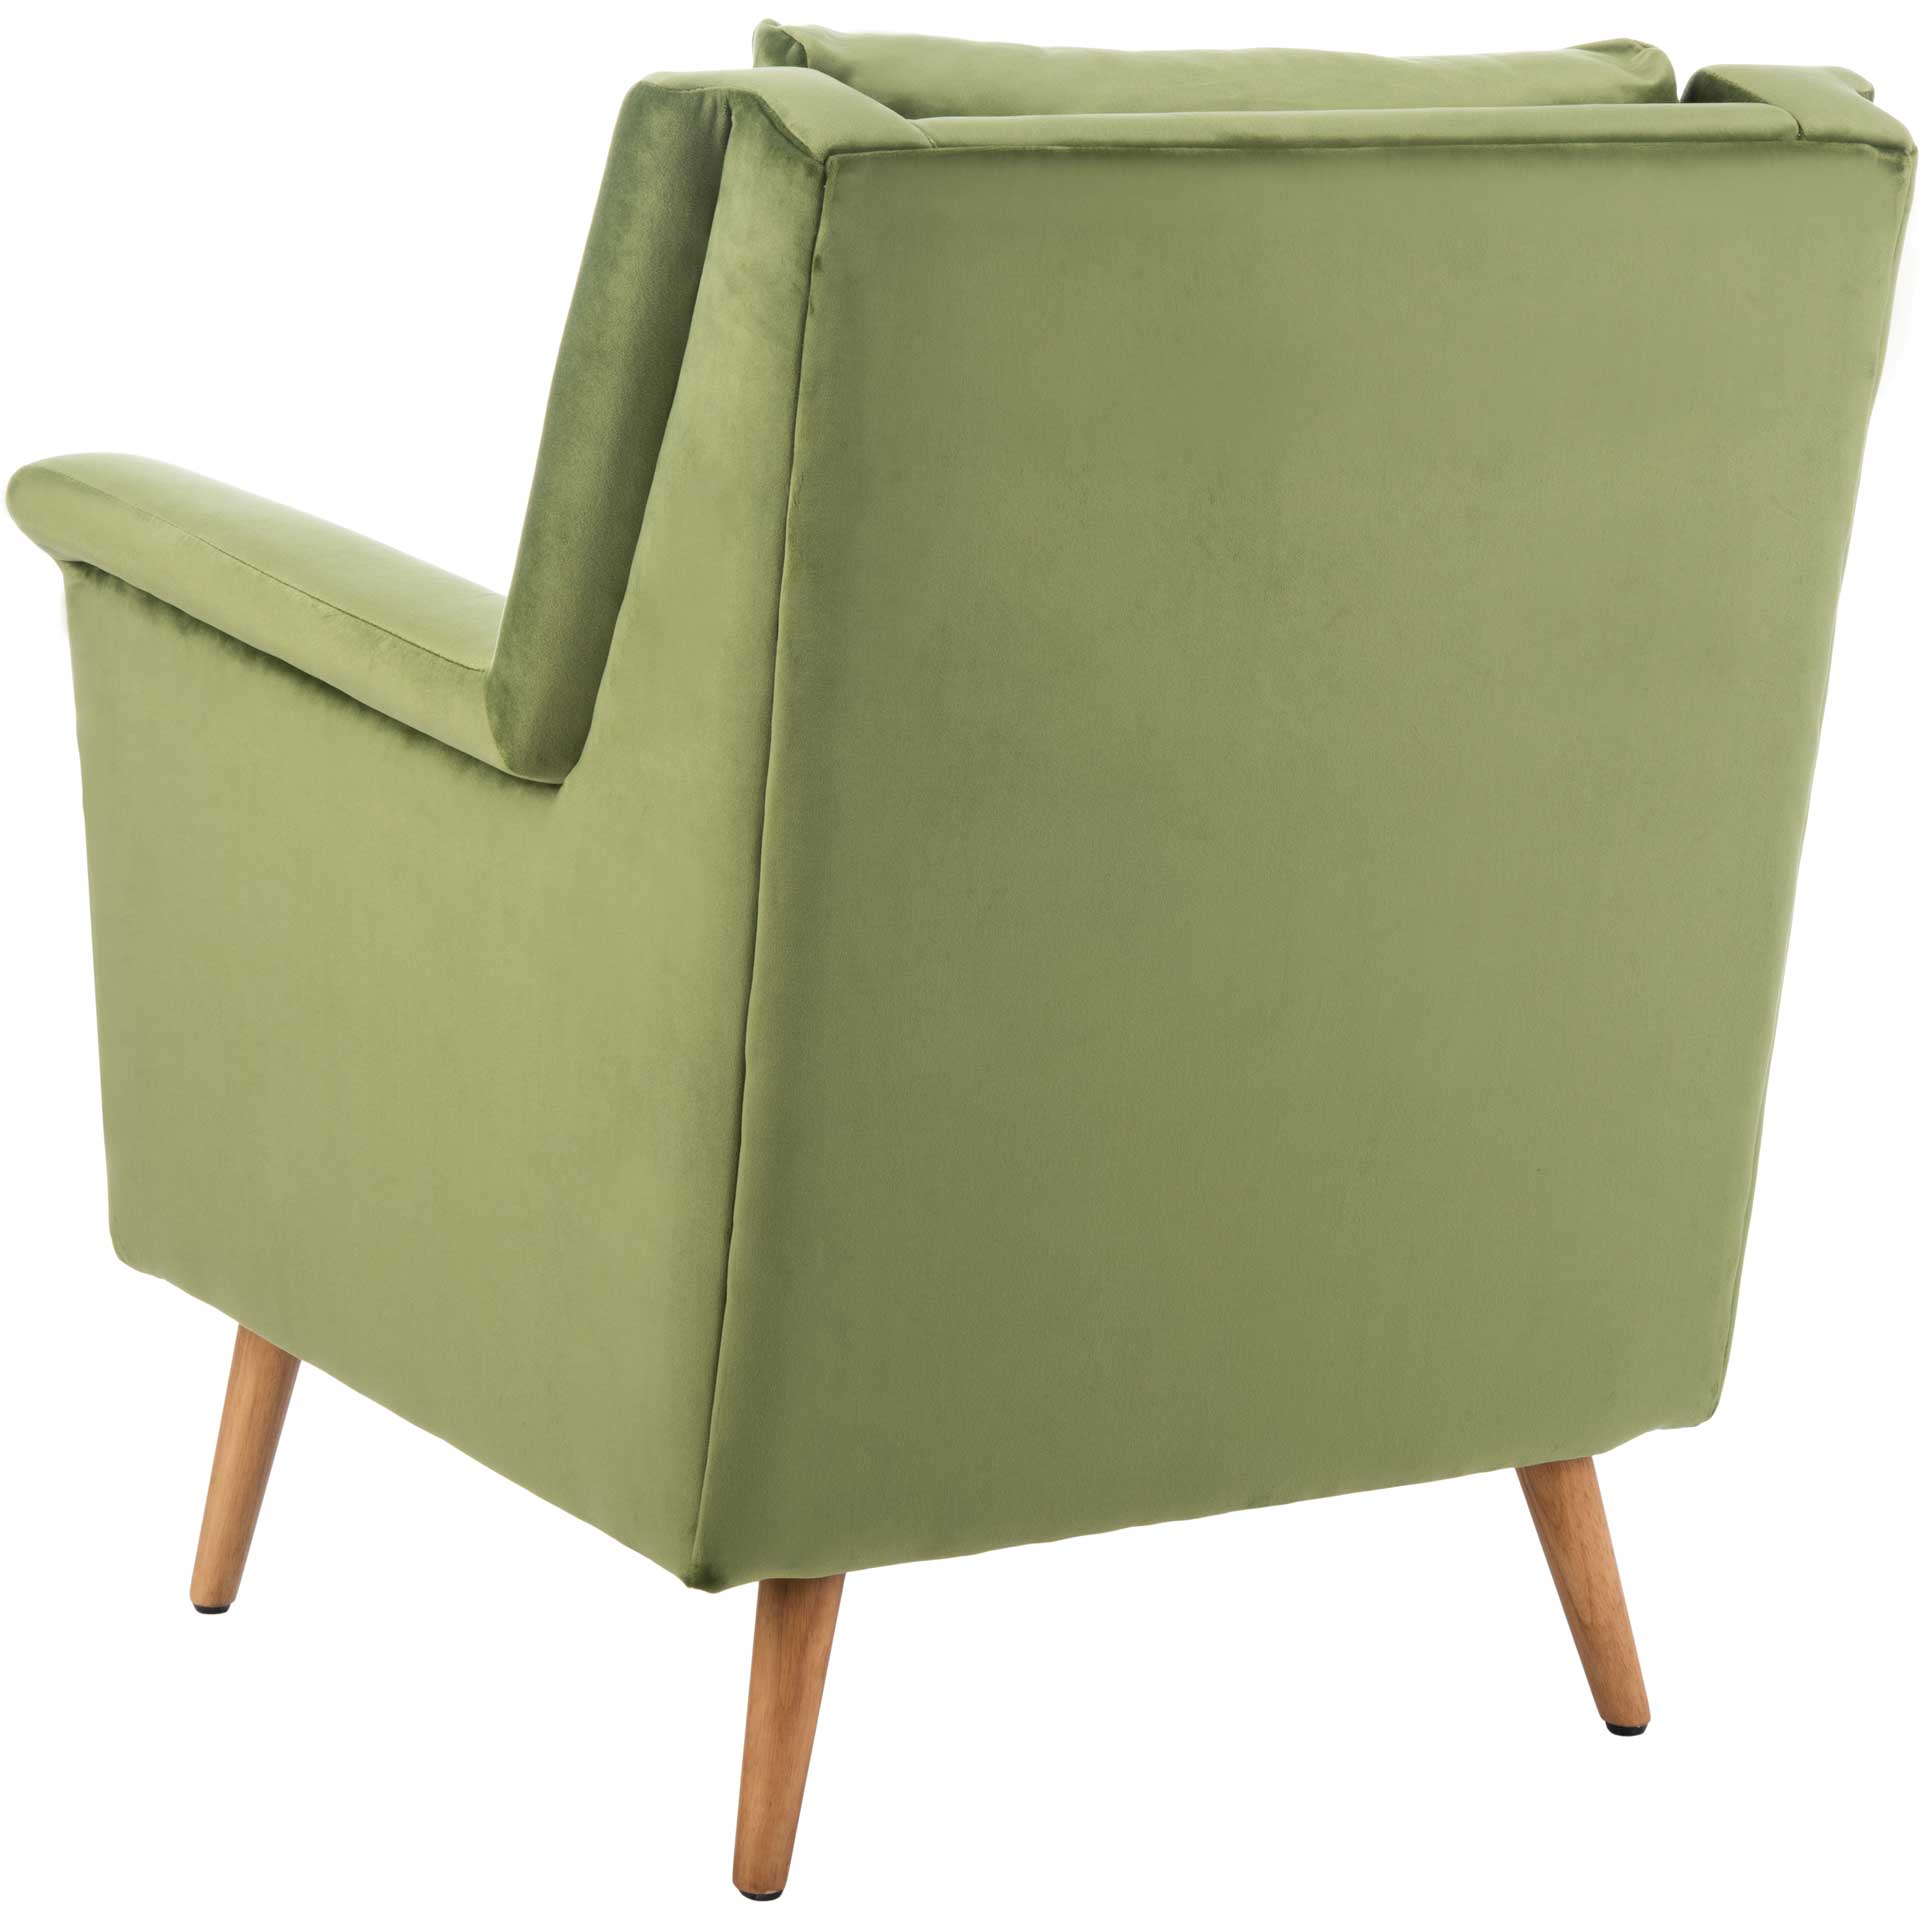 Aspen Mid Century Arm Chair Olive/Natural